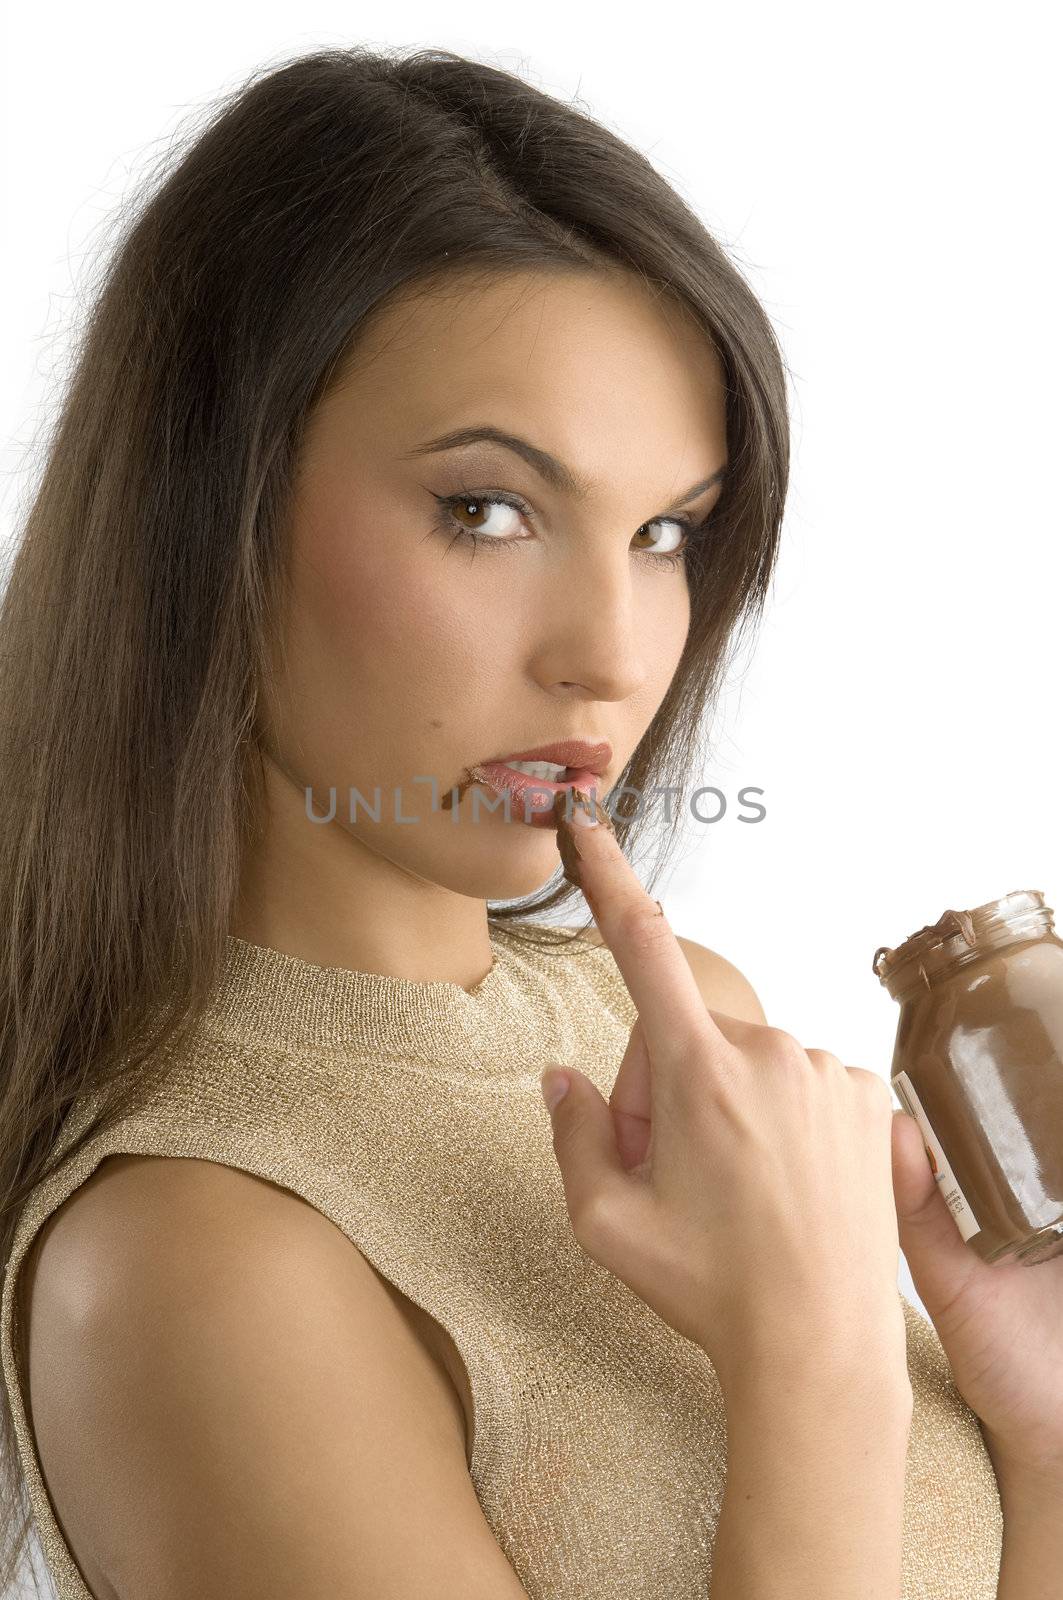 nice girl with long hair eating some chocolate cream from her finger